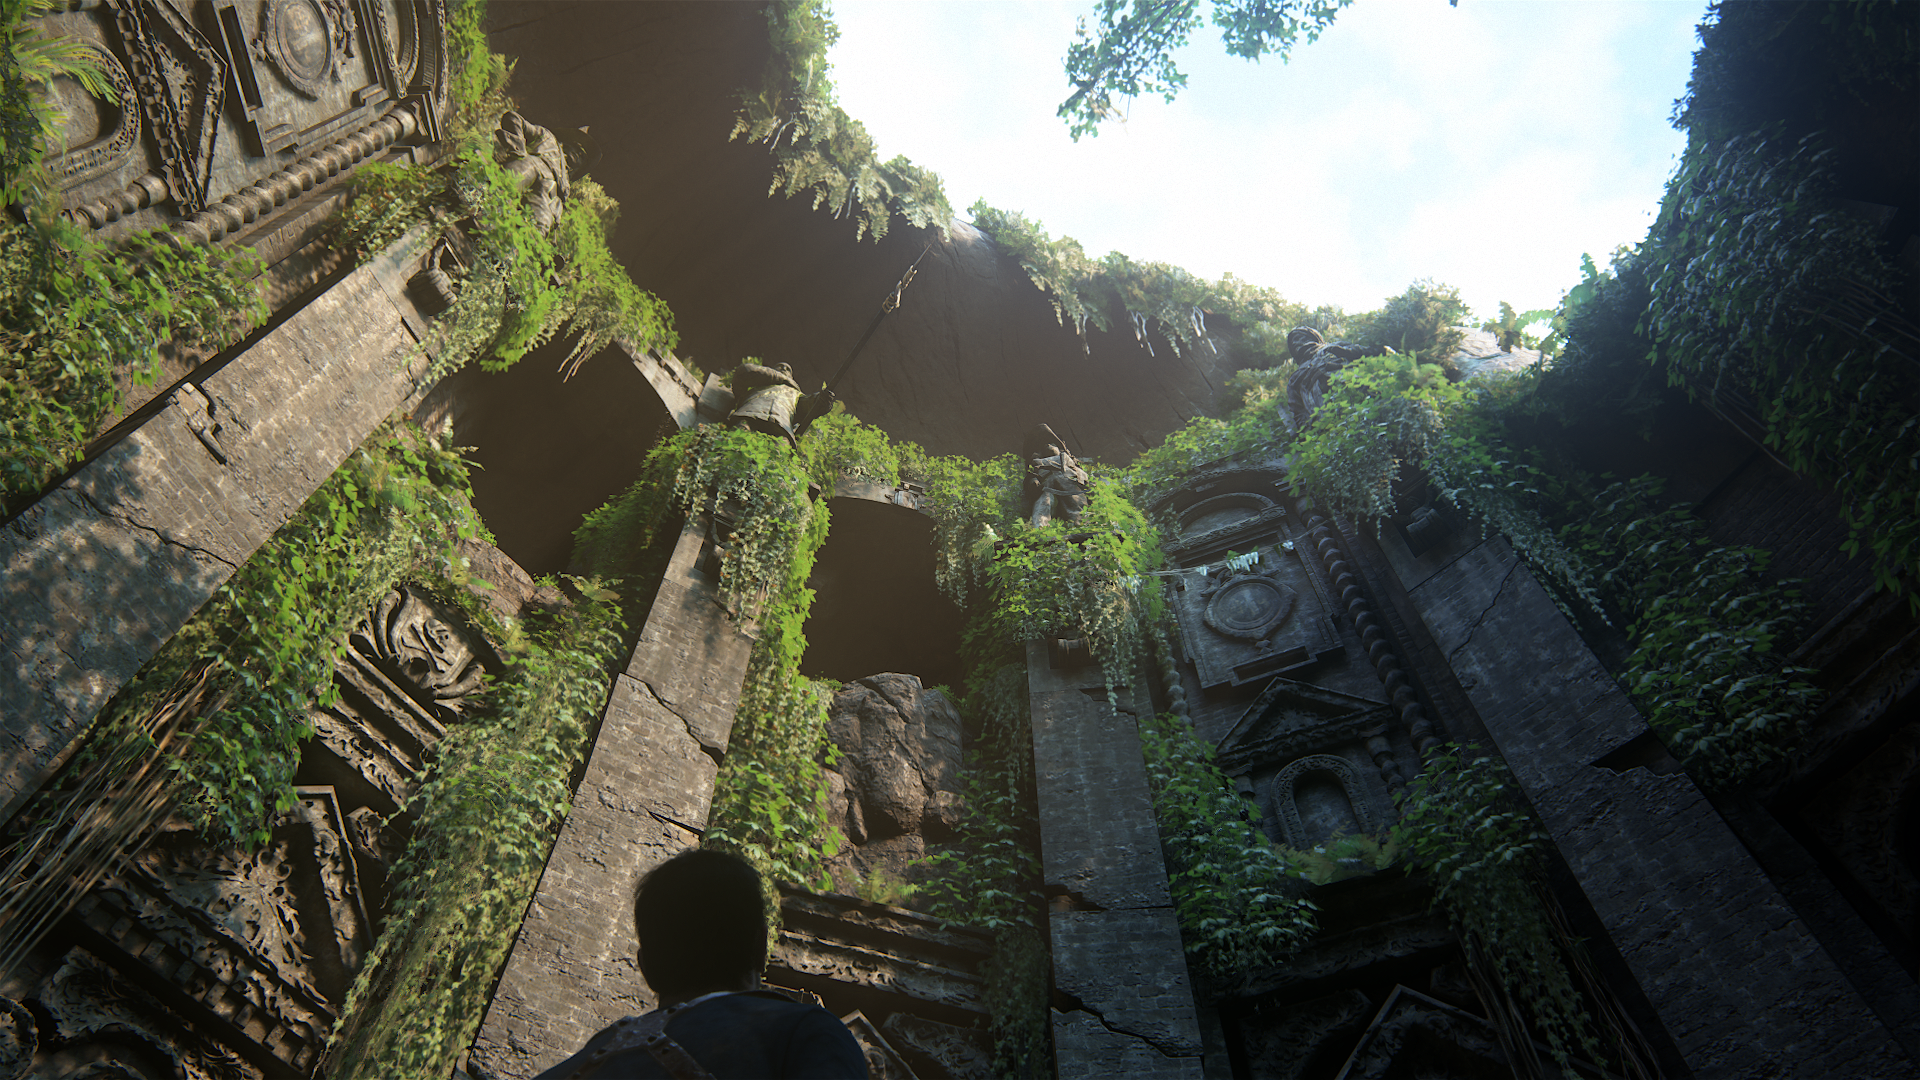 General 1920x1080 Uncharted 4: A Thief's End uncharted  PlayStation 4 video games screen shot Naughty Dog